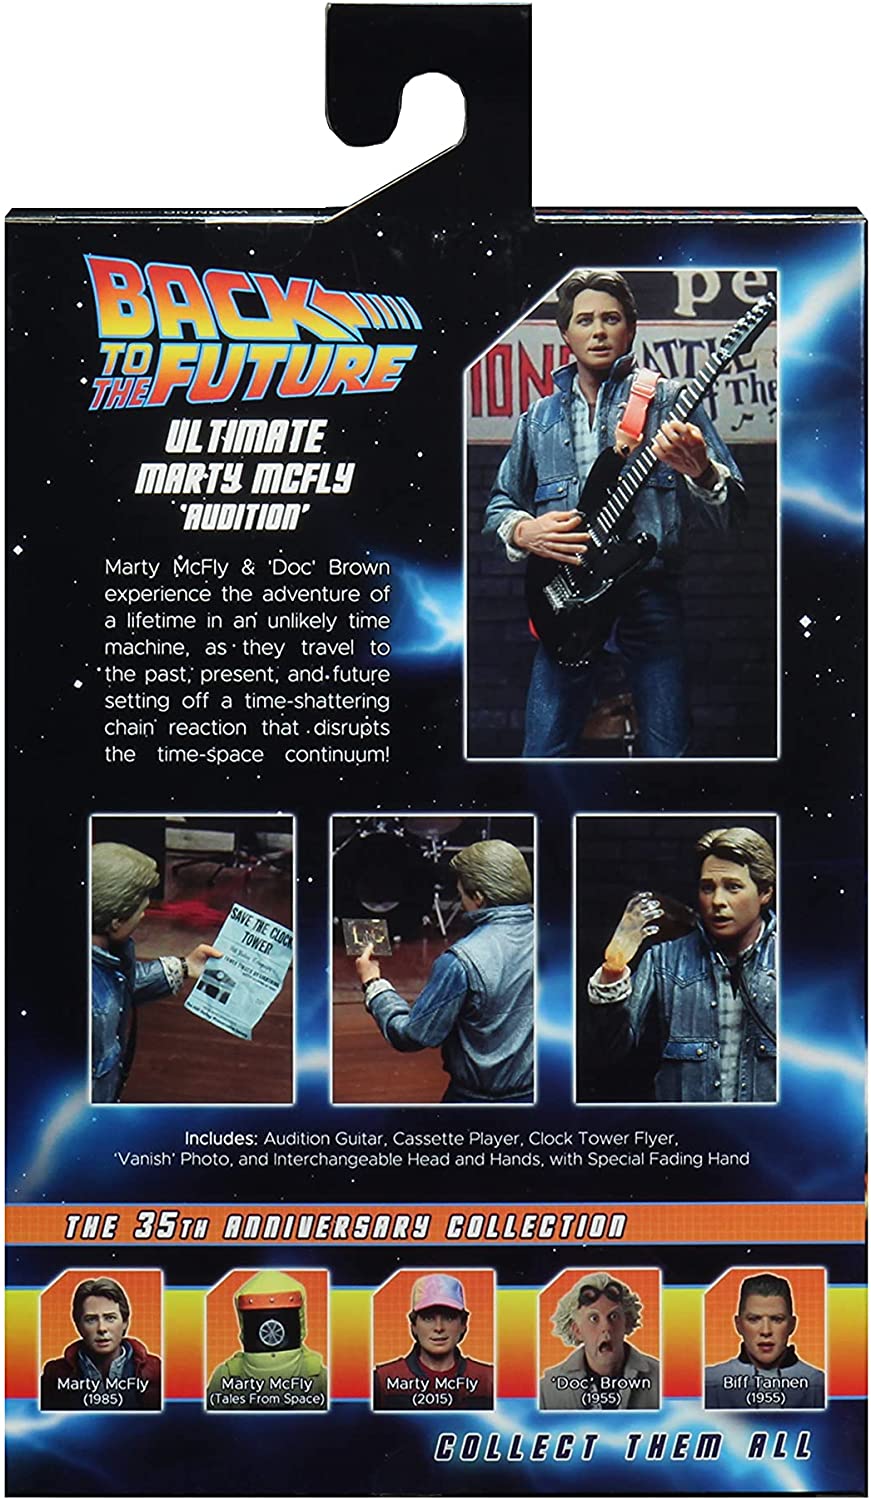 NECA - Back To The Future Marty Mcfly 85 Audition Ultimate 7 Action Figure